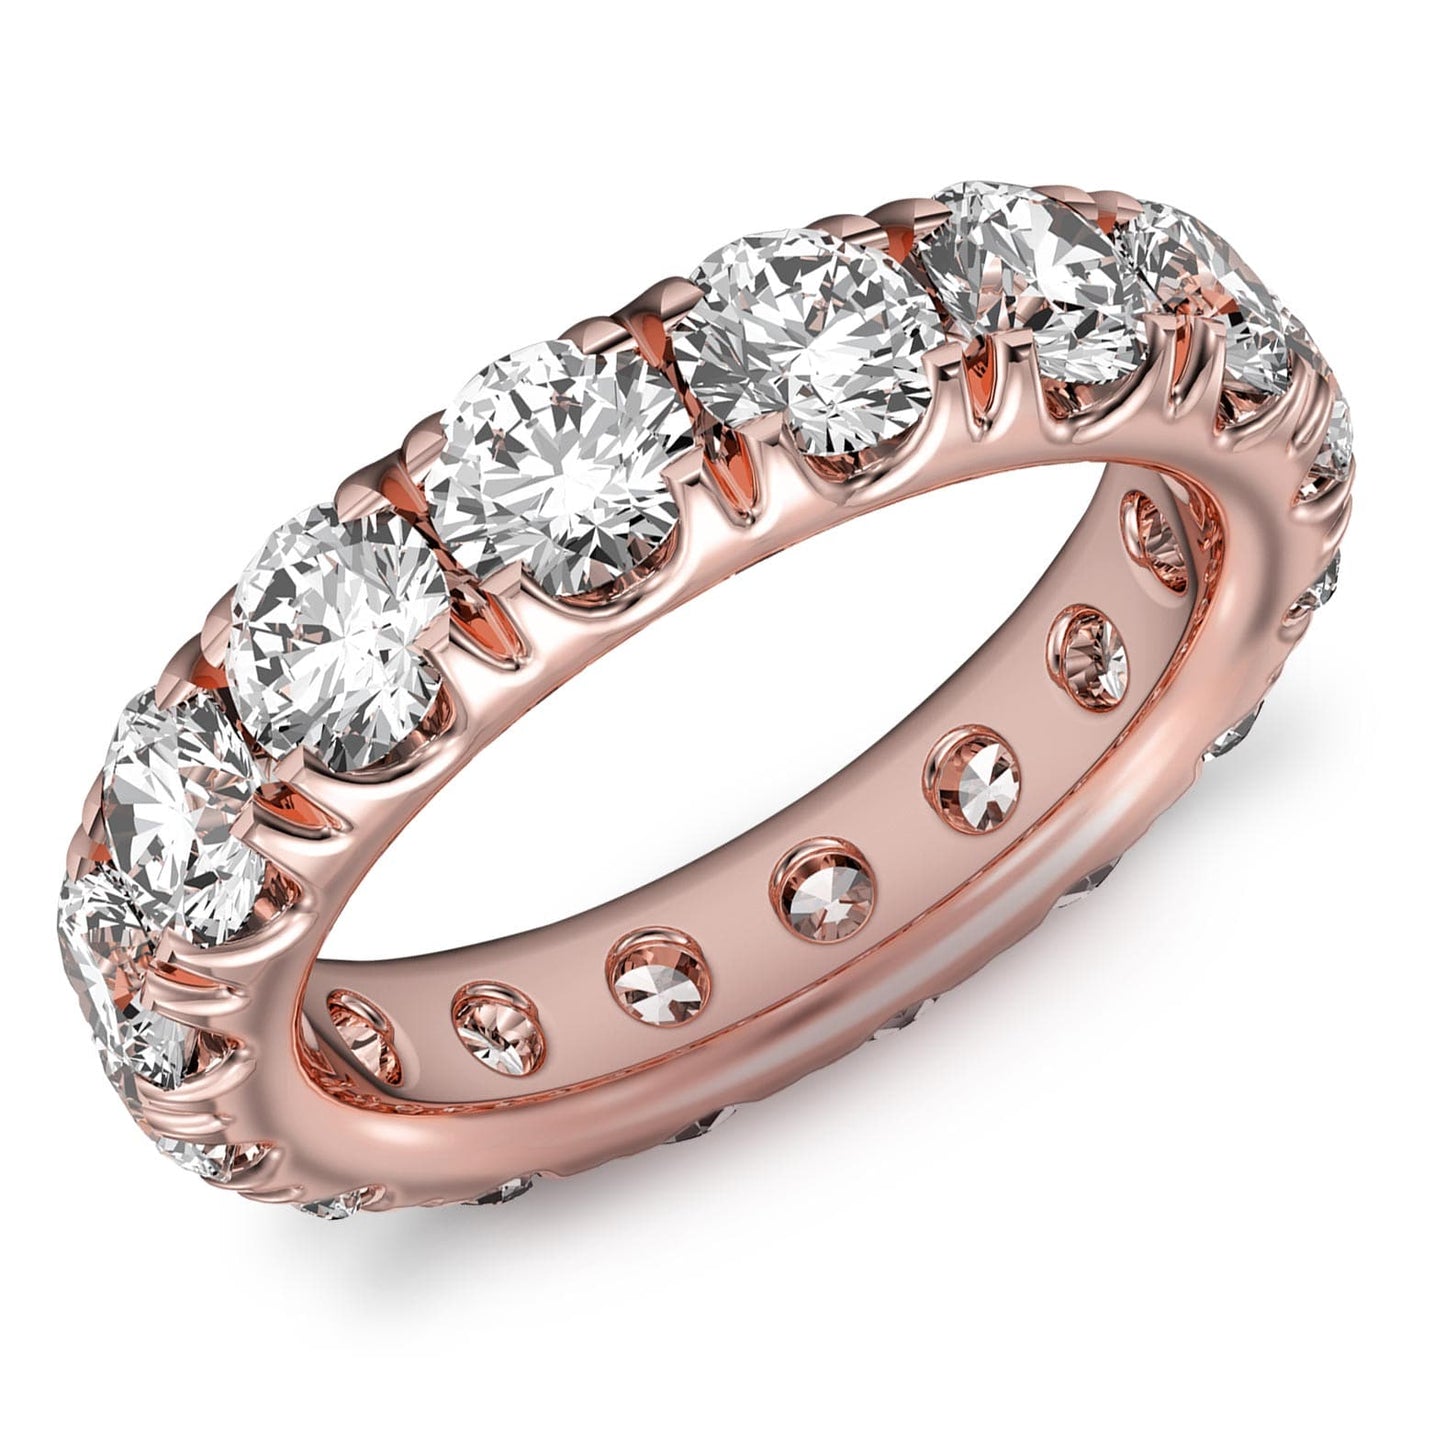 4ct French Pave Diamond Eternity Band in 14k Gold